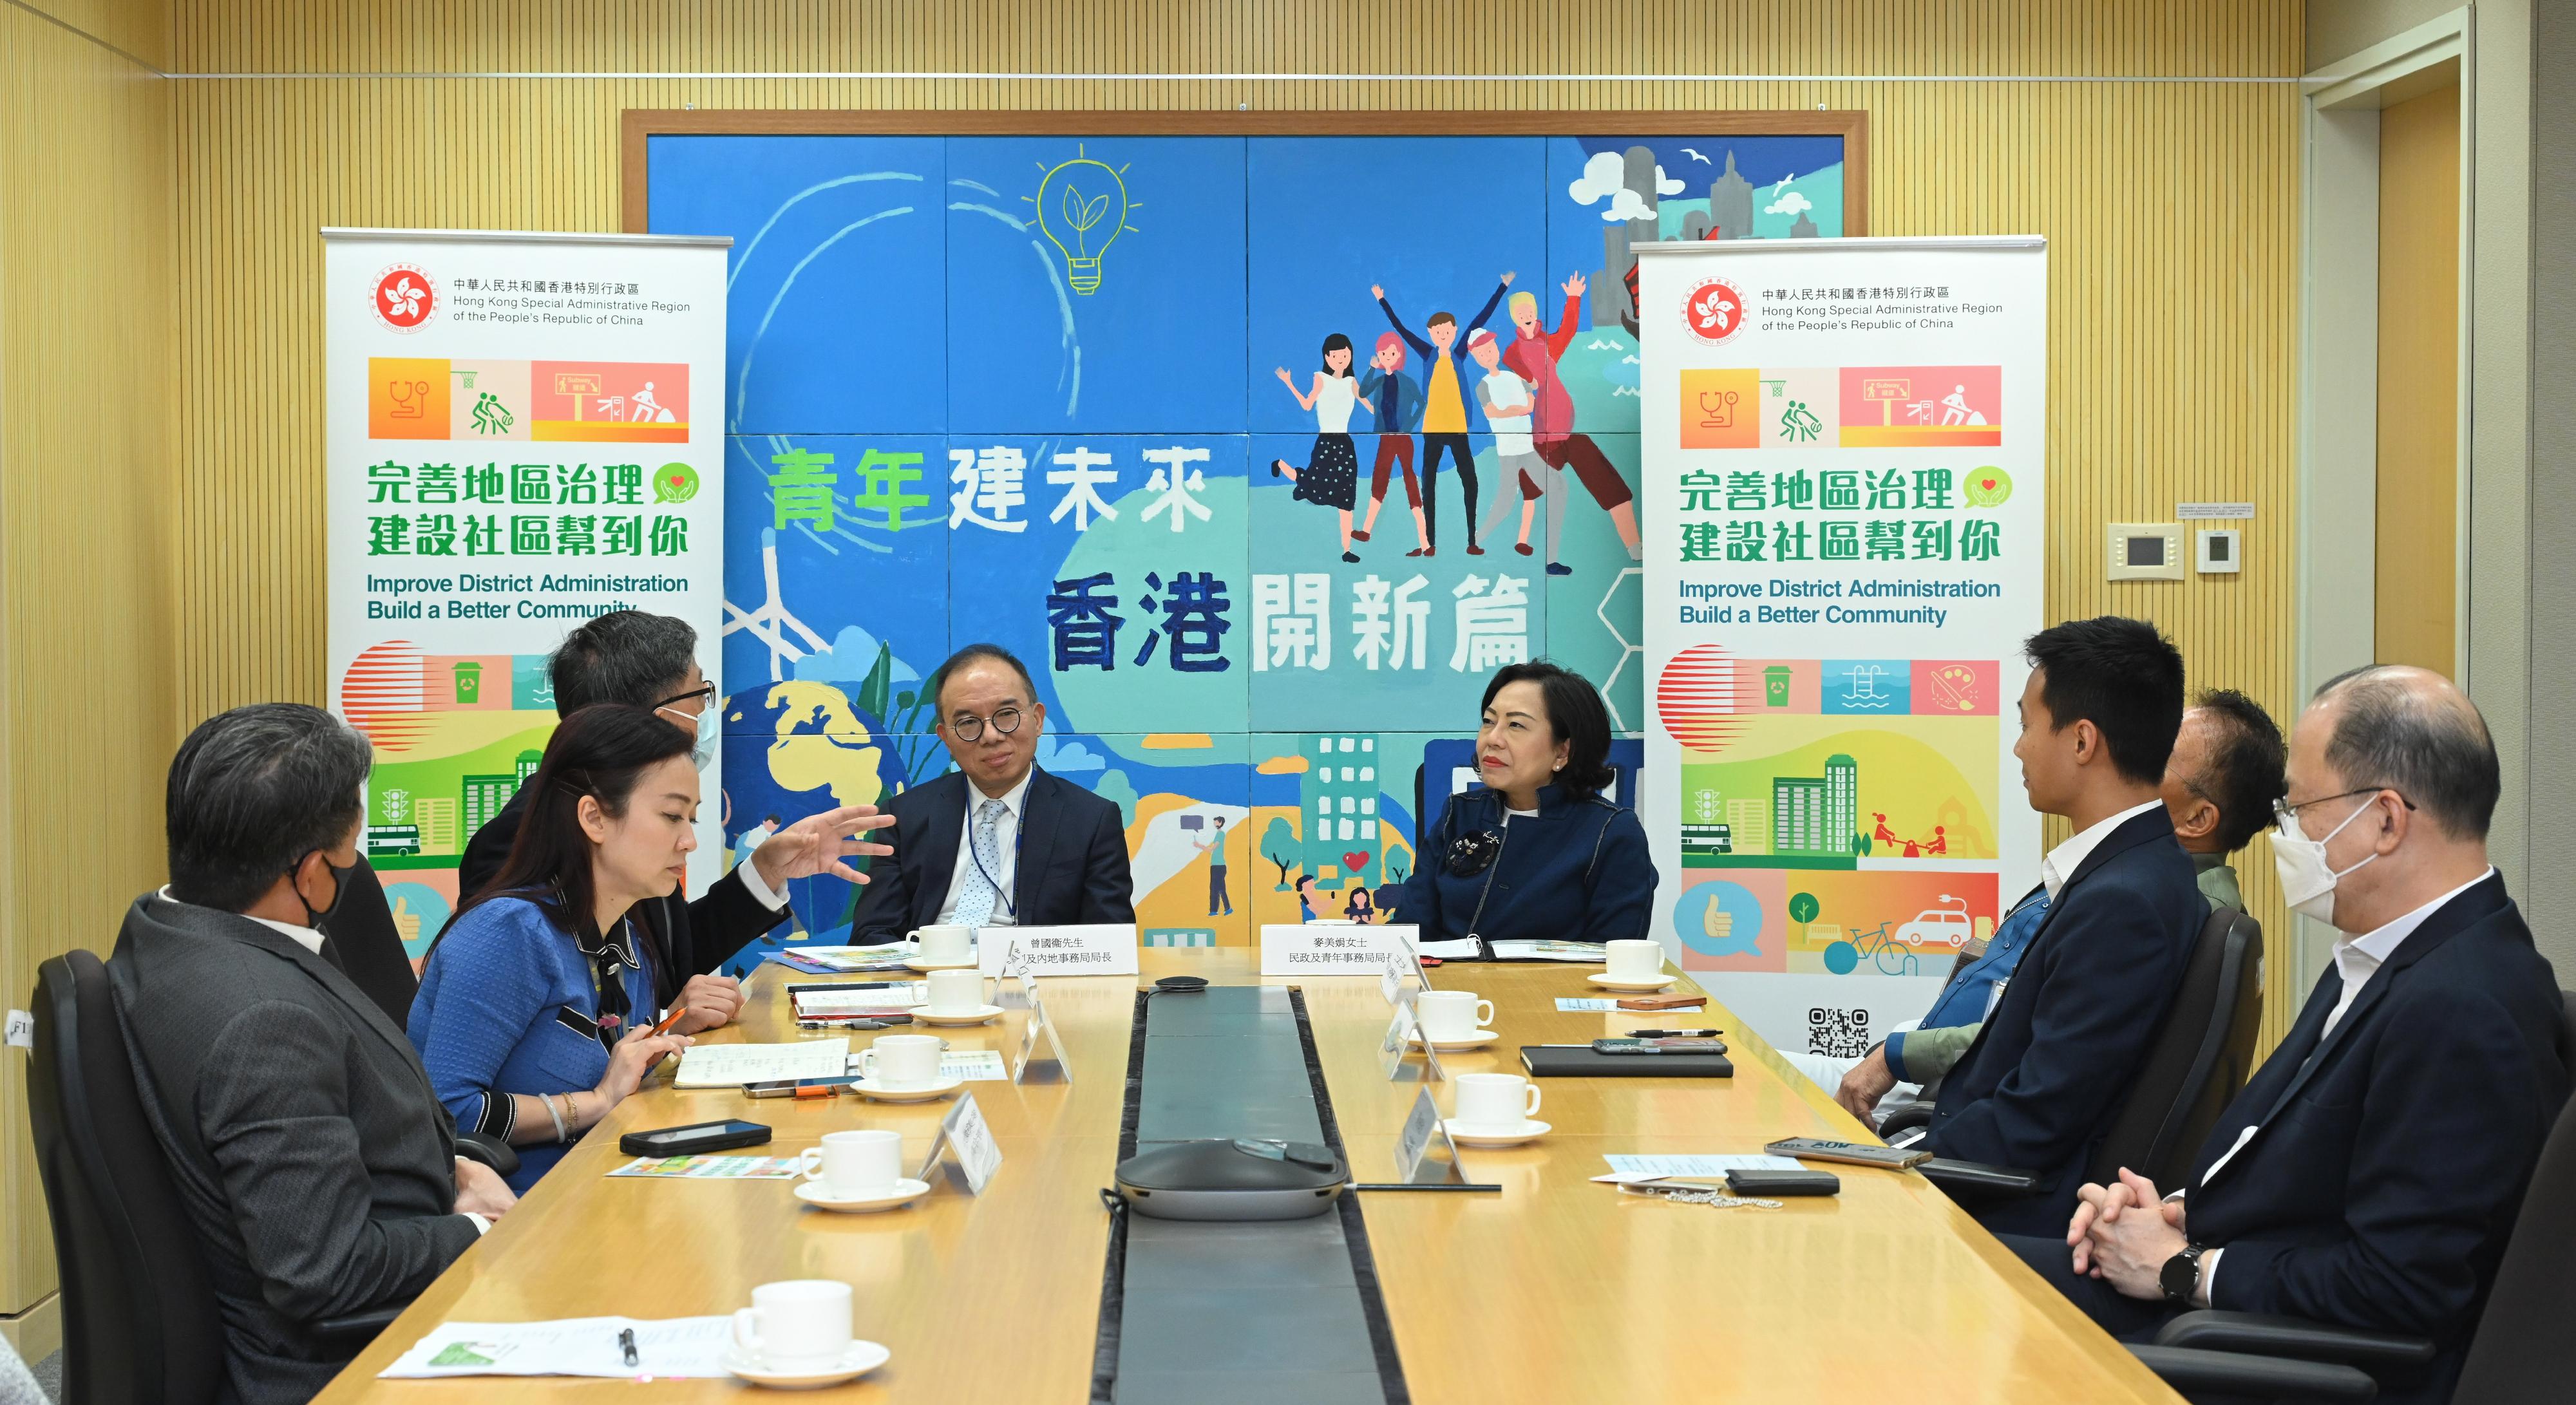 The Secretary for Constitutional and Mainland Affairs, Mr Erick Tsang Kwok-wai, and the Secretary for Home and Youth Affairs, Miss Alice Mak, today (May 11) briefed Legislative Council (LegCo) Members and association representatives on the proposals to improve governance at the district level. Photo shows Mr Tsang (fourth left) and Miss Mak (fourth right) briefing LegCo Members on the proposals.